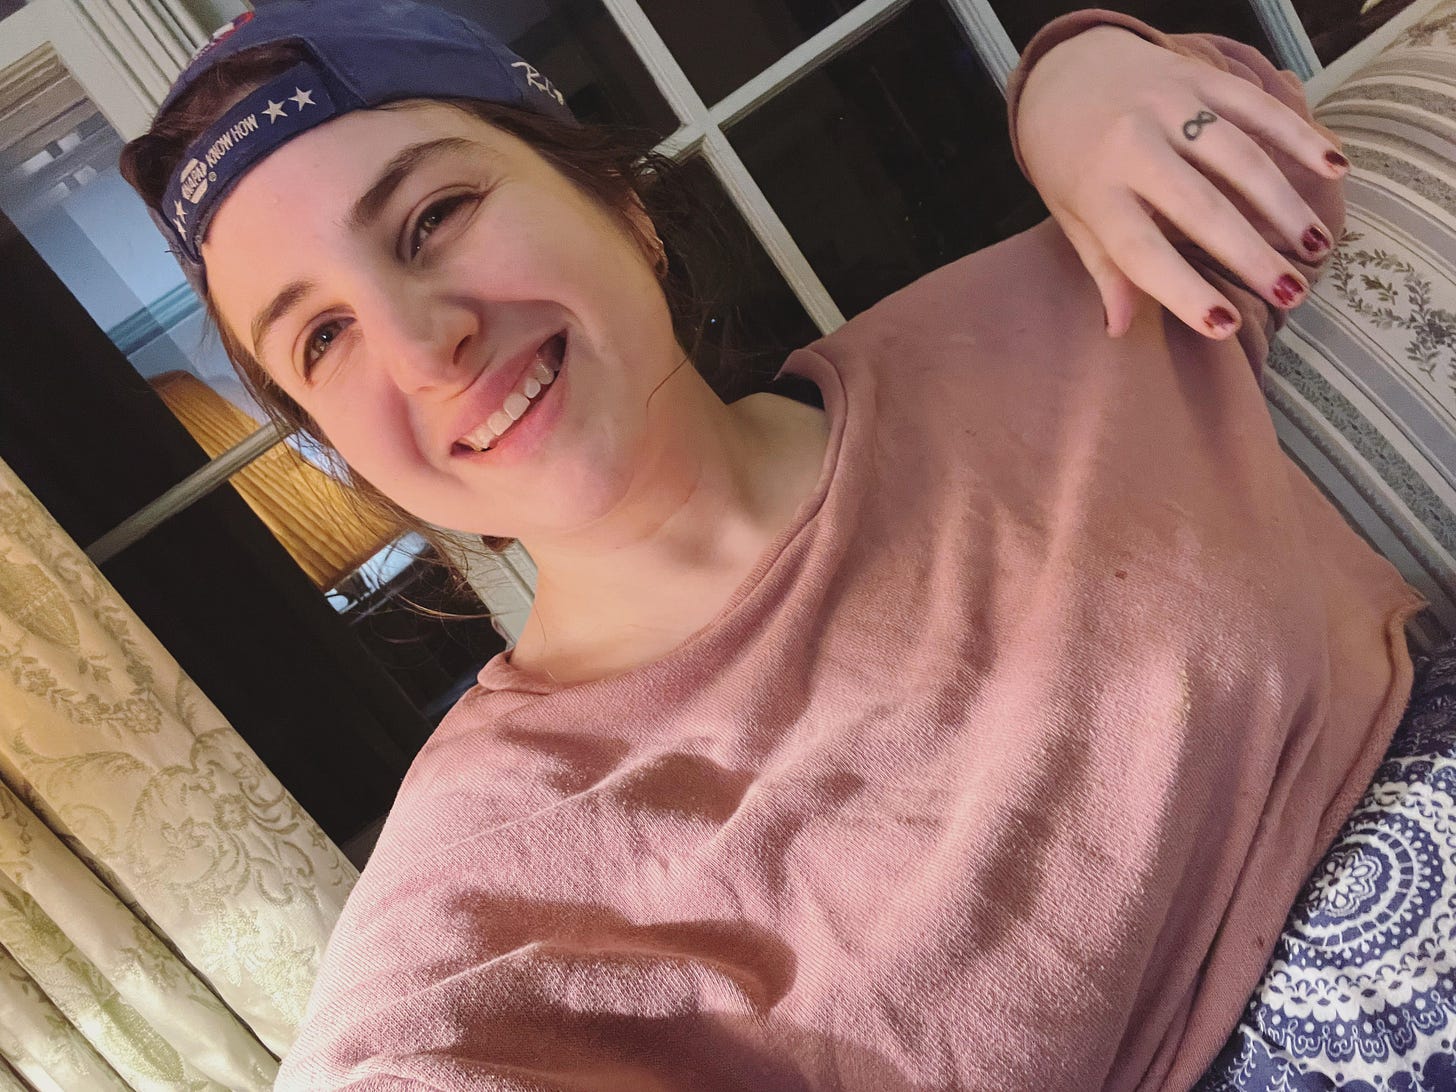 it's jennifer c. martin, a woman in her 30s smiling wearing a ball cap and a cozy pink half sweater and you can see her soft patterned blue pants peakin up. her nails are trash but otherwise she's pretty cute here imo. she's sitting on a couch in front of a window with drapes visible